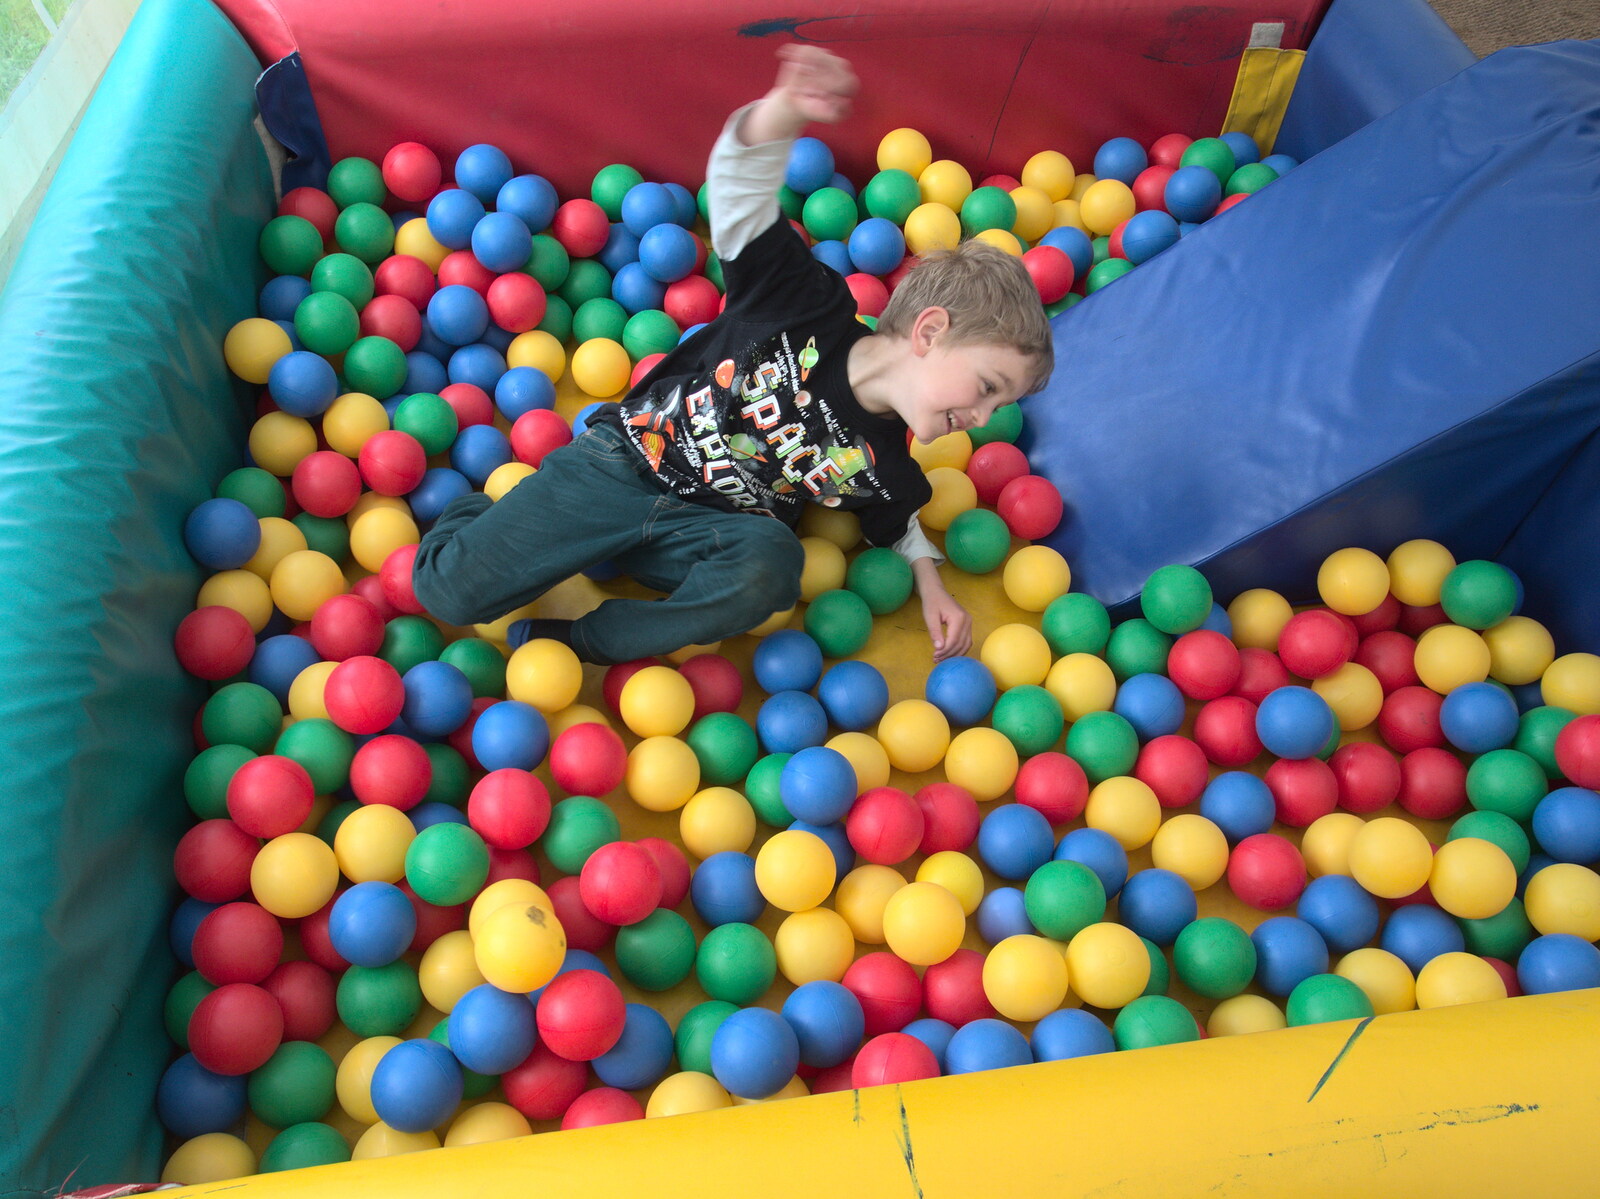 Fred hurls himself around in the ball pit from Making Dens: Rosie's Birthday, Thornham, Suffolk - 25th April 2015